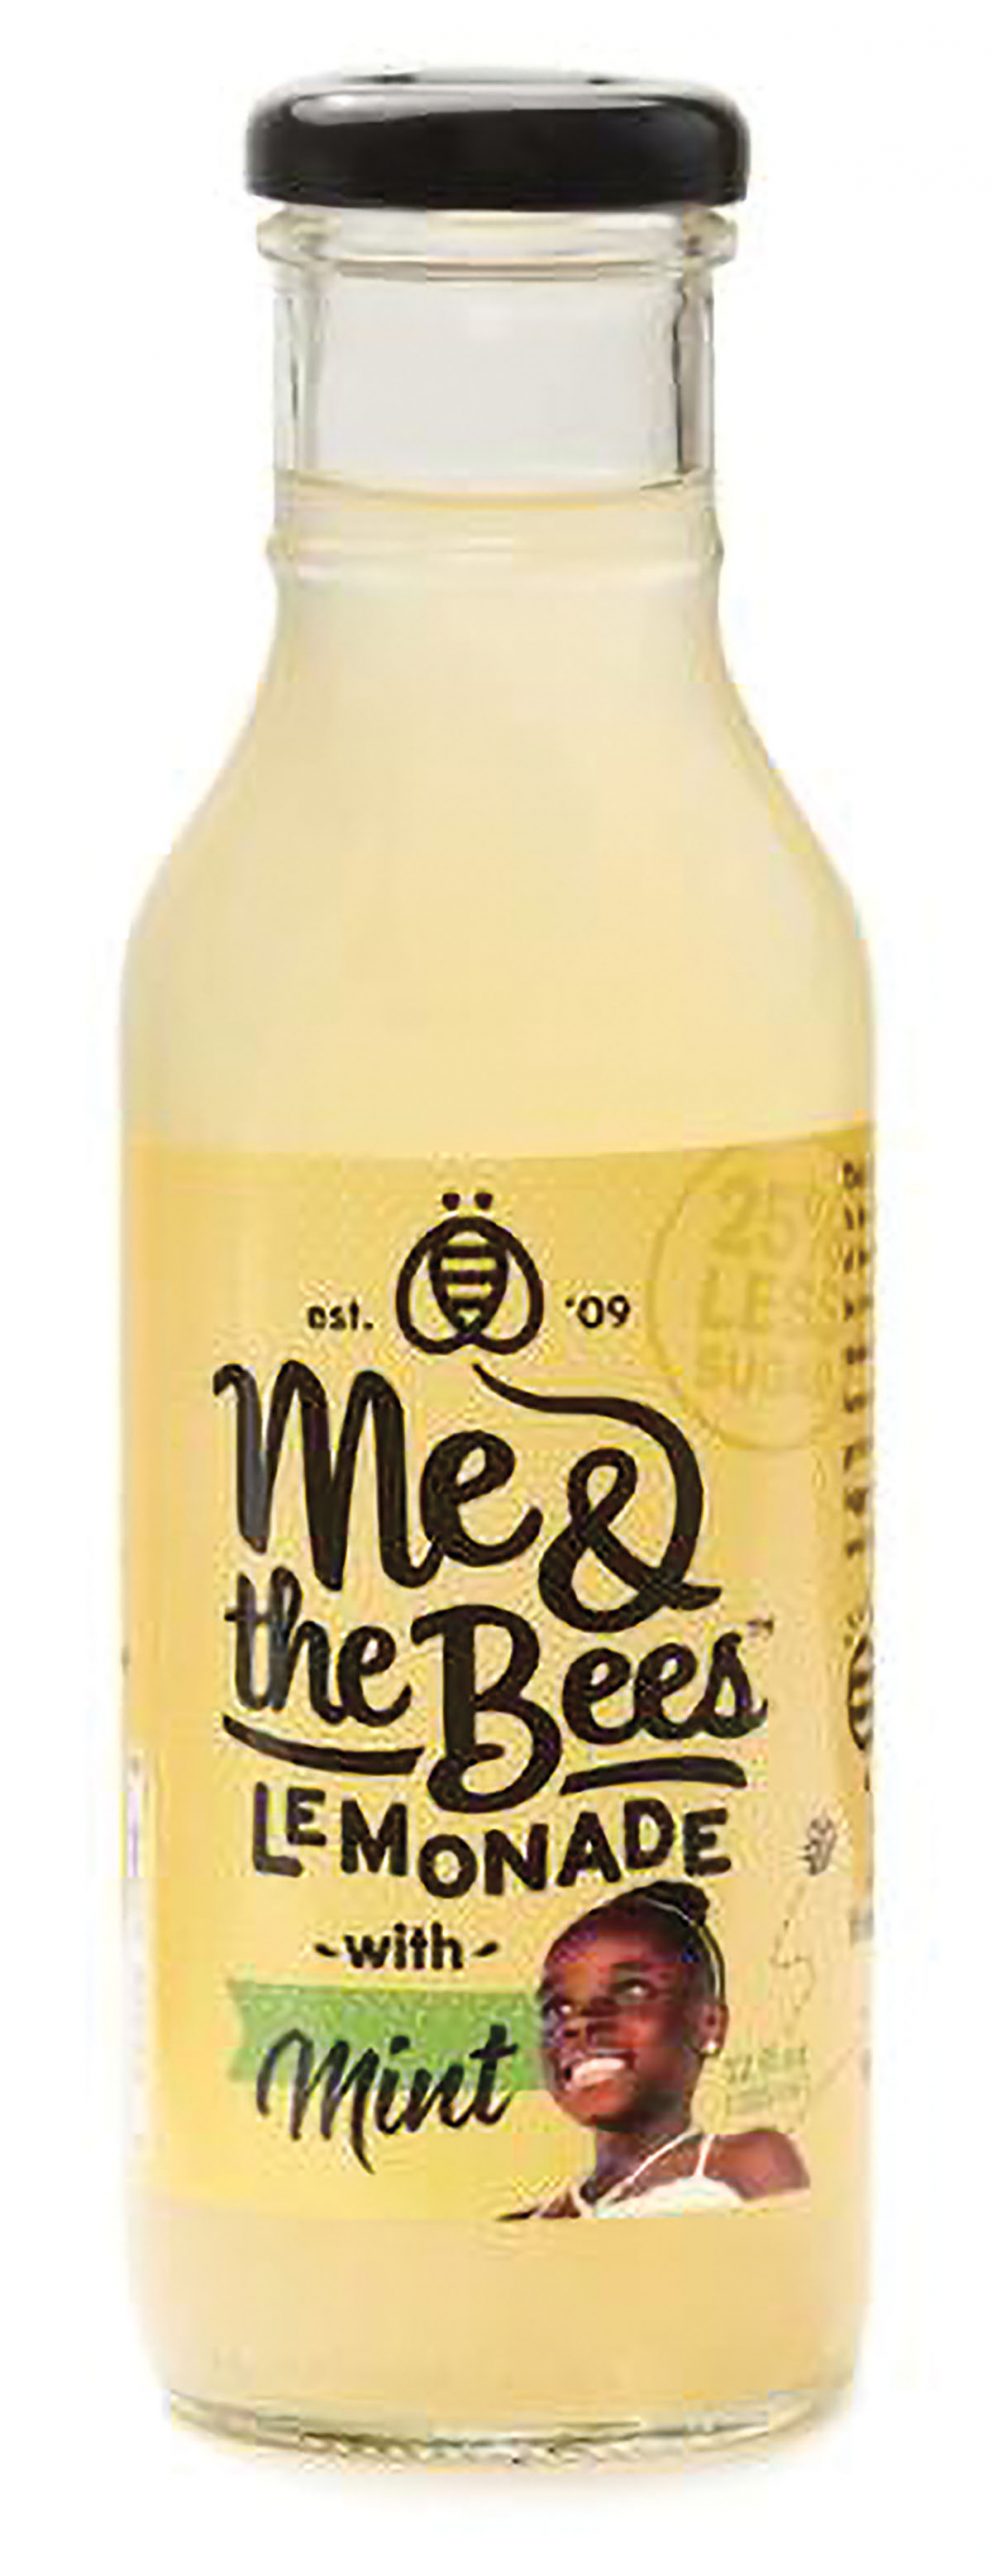 A yellow bottle of lemonade with a label reading "Me and the Bees"